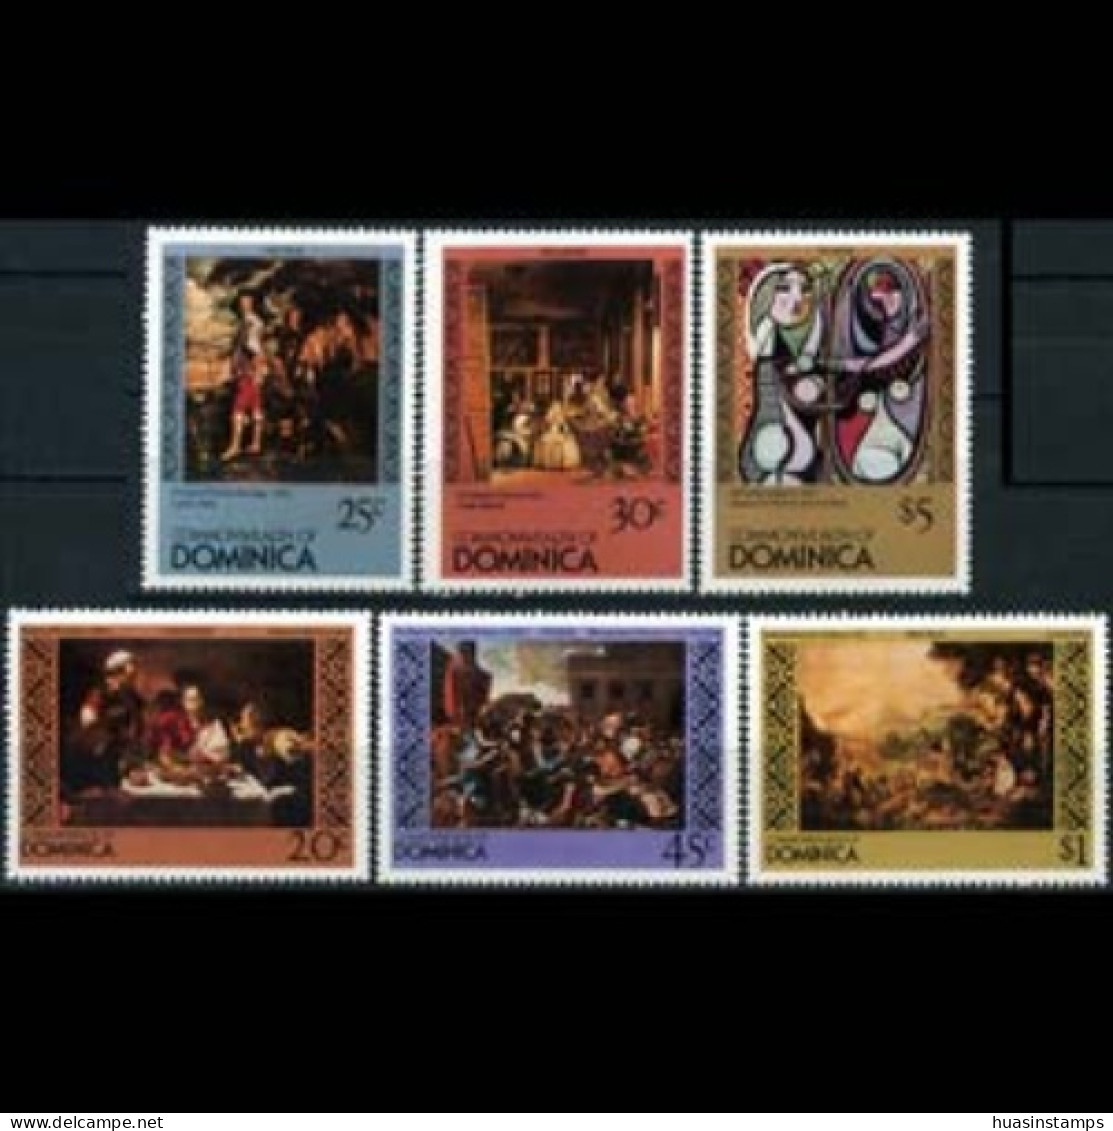 DOMINICA 1980 - Scott# 669-74 Paintings Set Of 6 MNH - Dominica (1978-...)